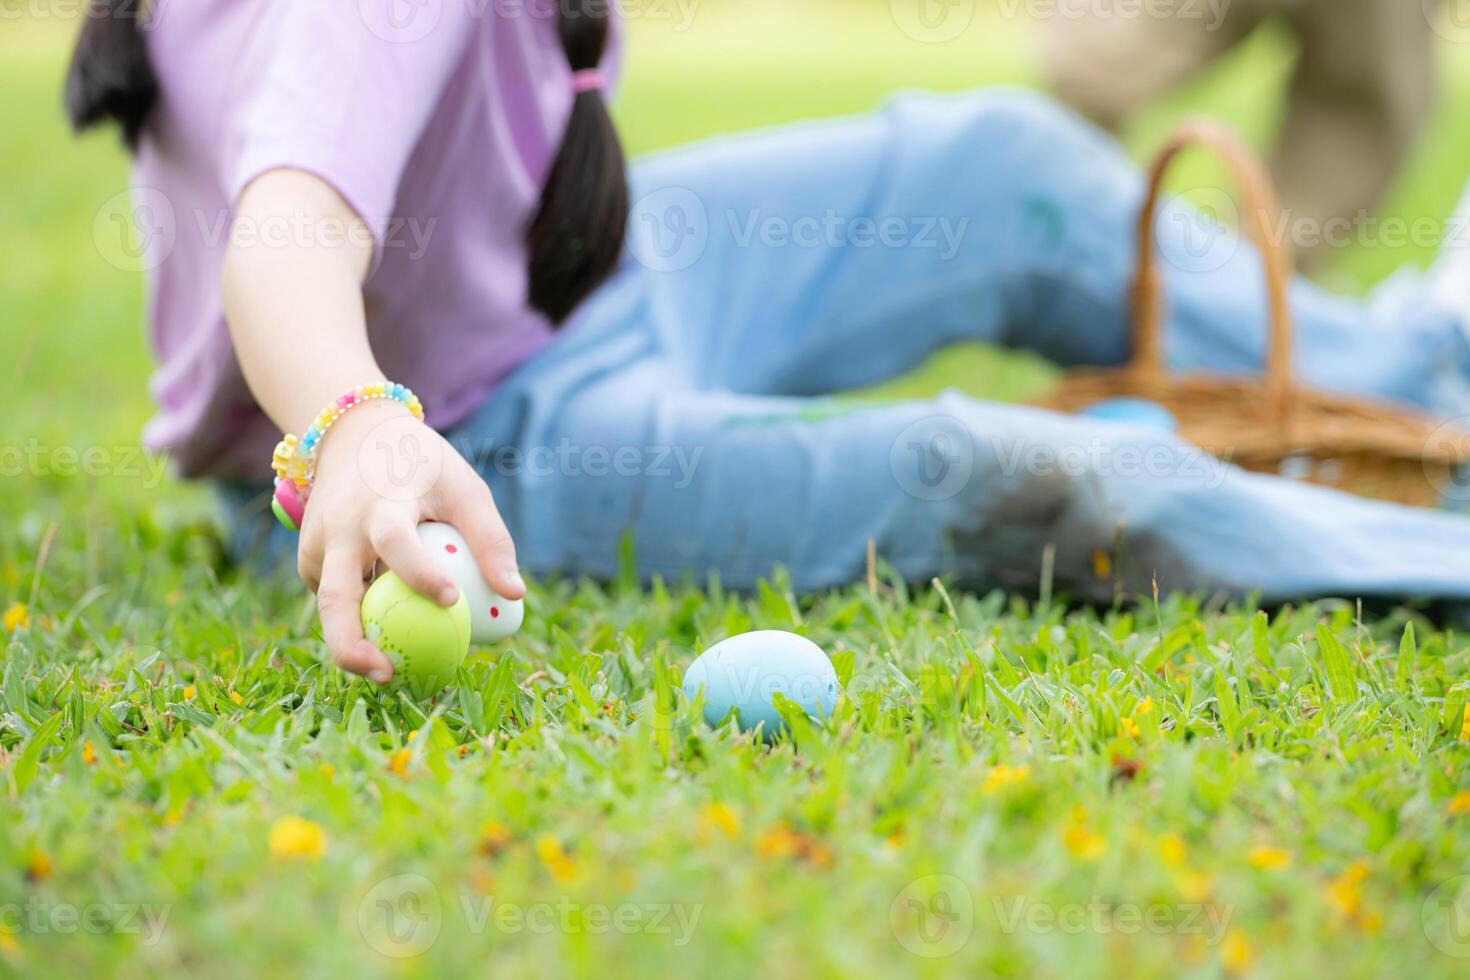 Children enjoying outdoor activities in the park including a run to collect beautiful Easter eggs. photo